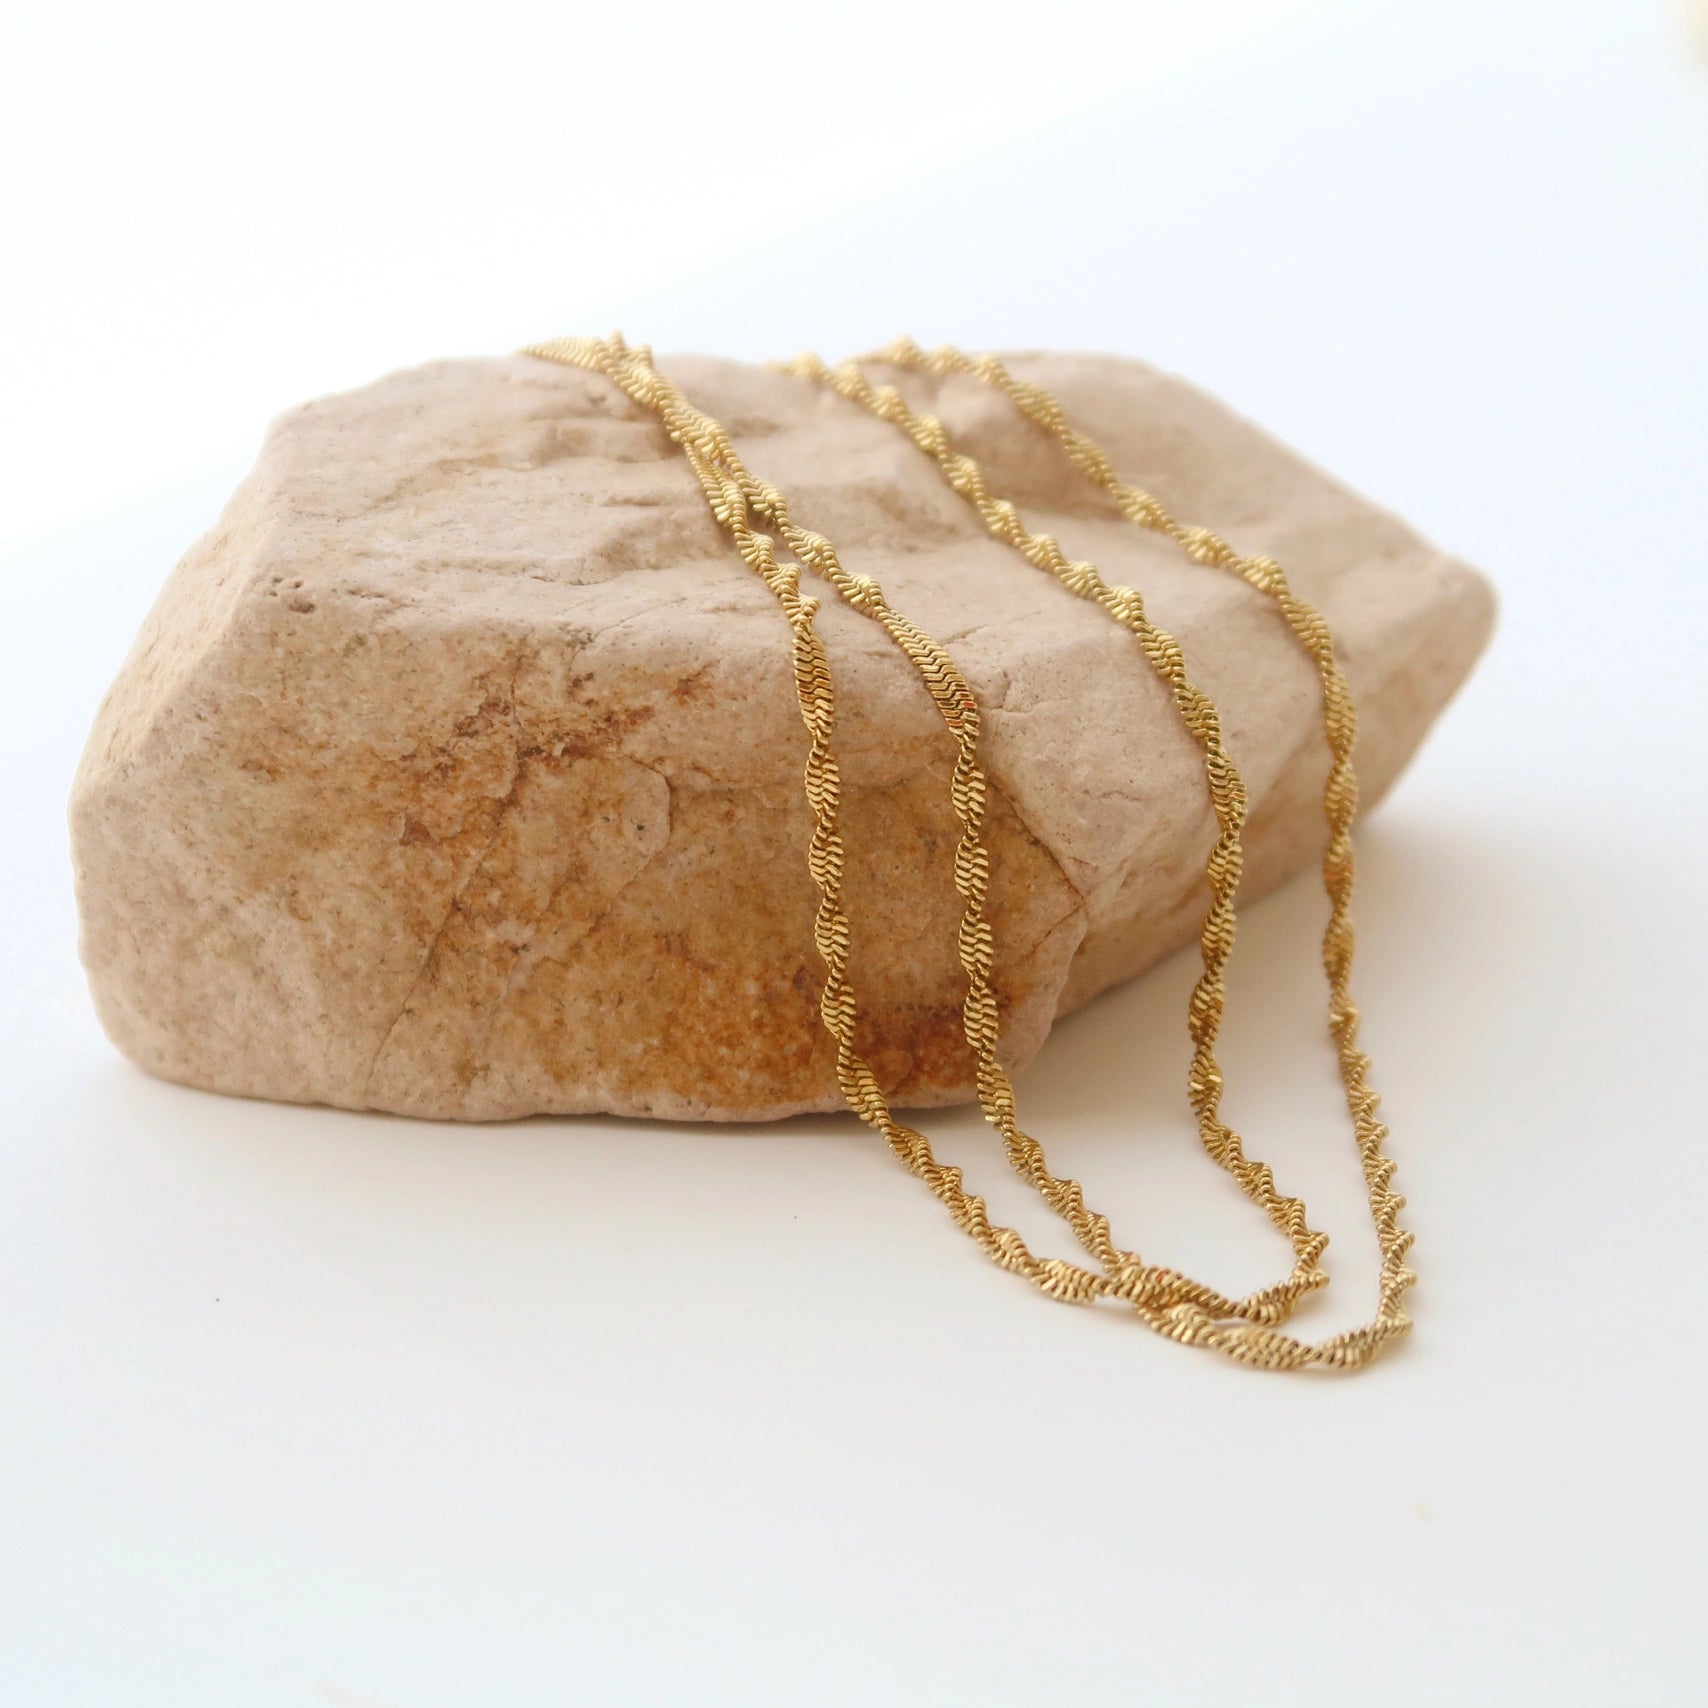 Kristin Rope Chain Necklace - 18K Gold